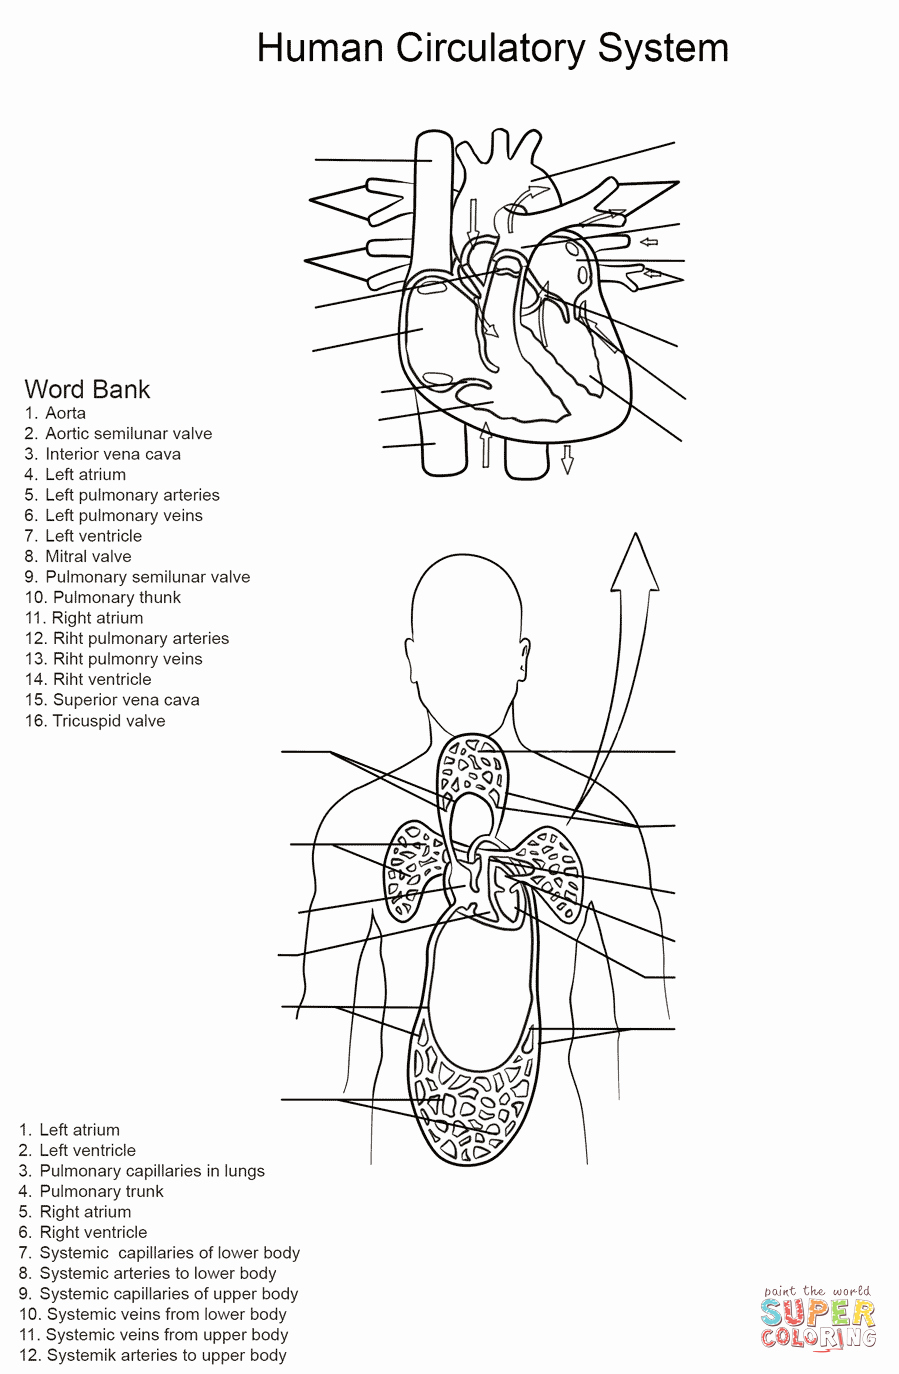 The Circulatory System Worksheet Answers Luxury Human Circulatory System Worksheet Coloring Page